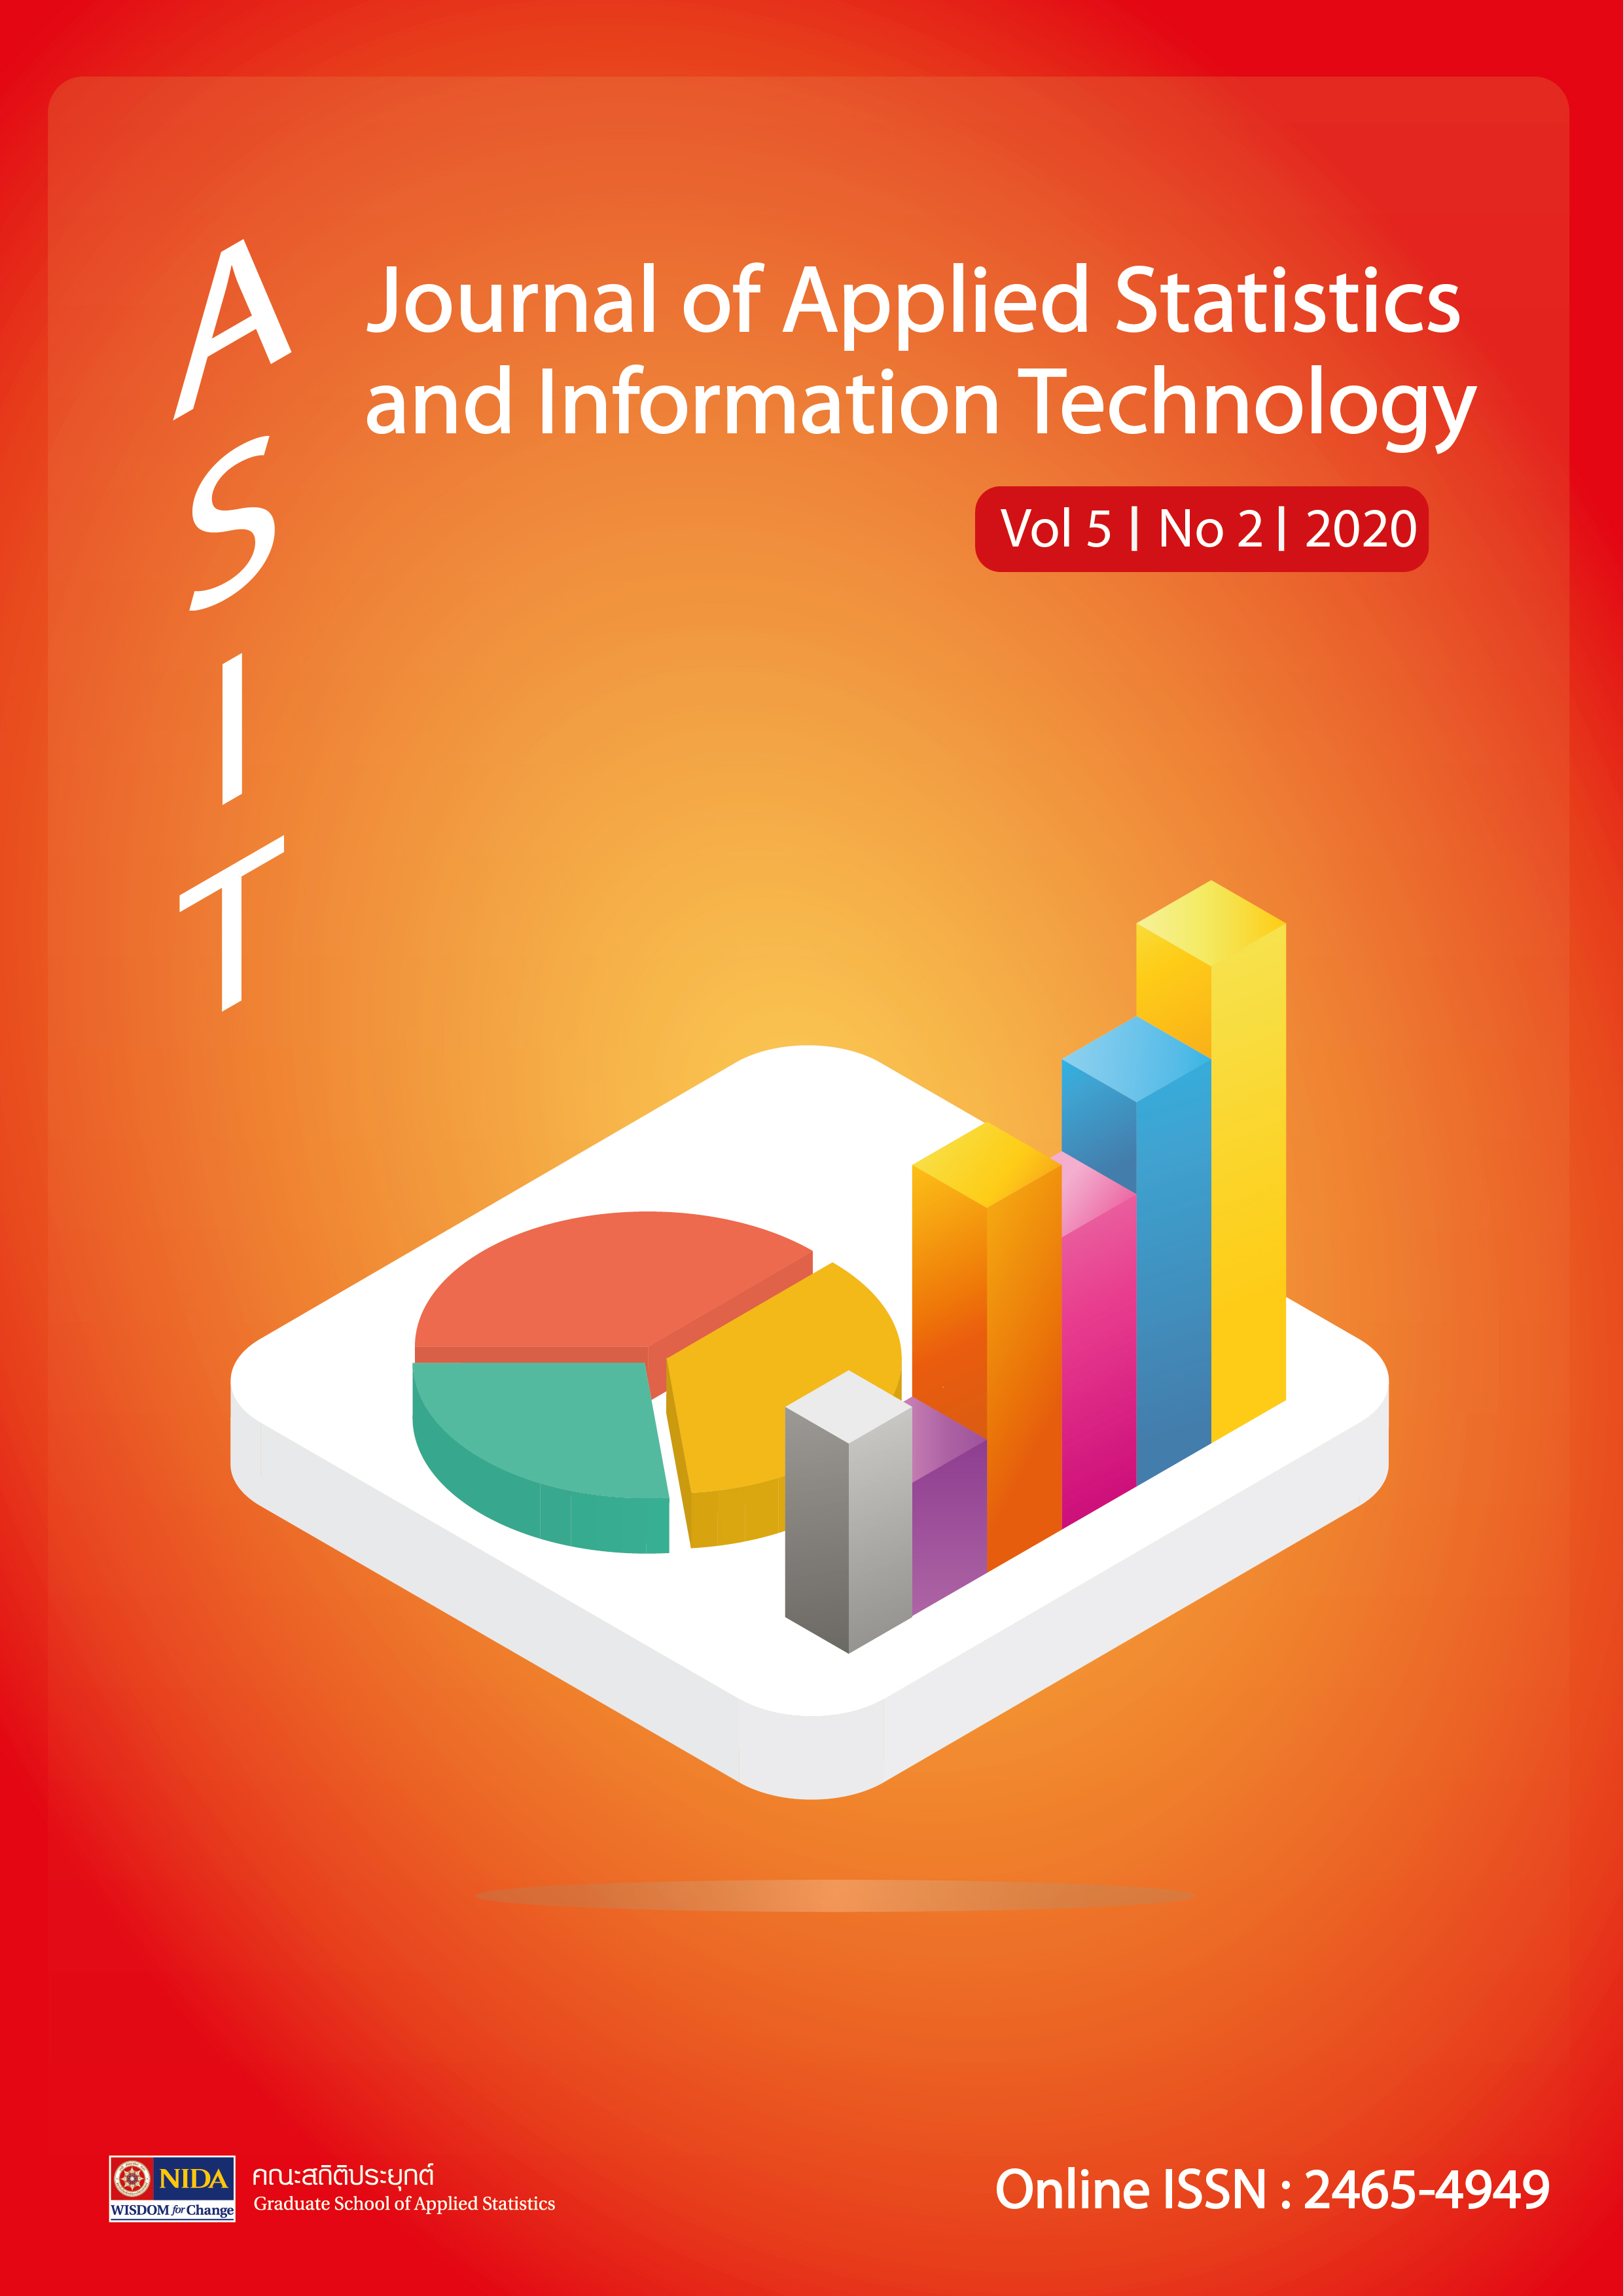 					View Vol. 5 No. 2 (2020): Journal of Applied Statistics and Information Technology Vol 5 No 2 (July - December 2020)
				